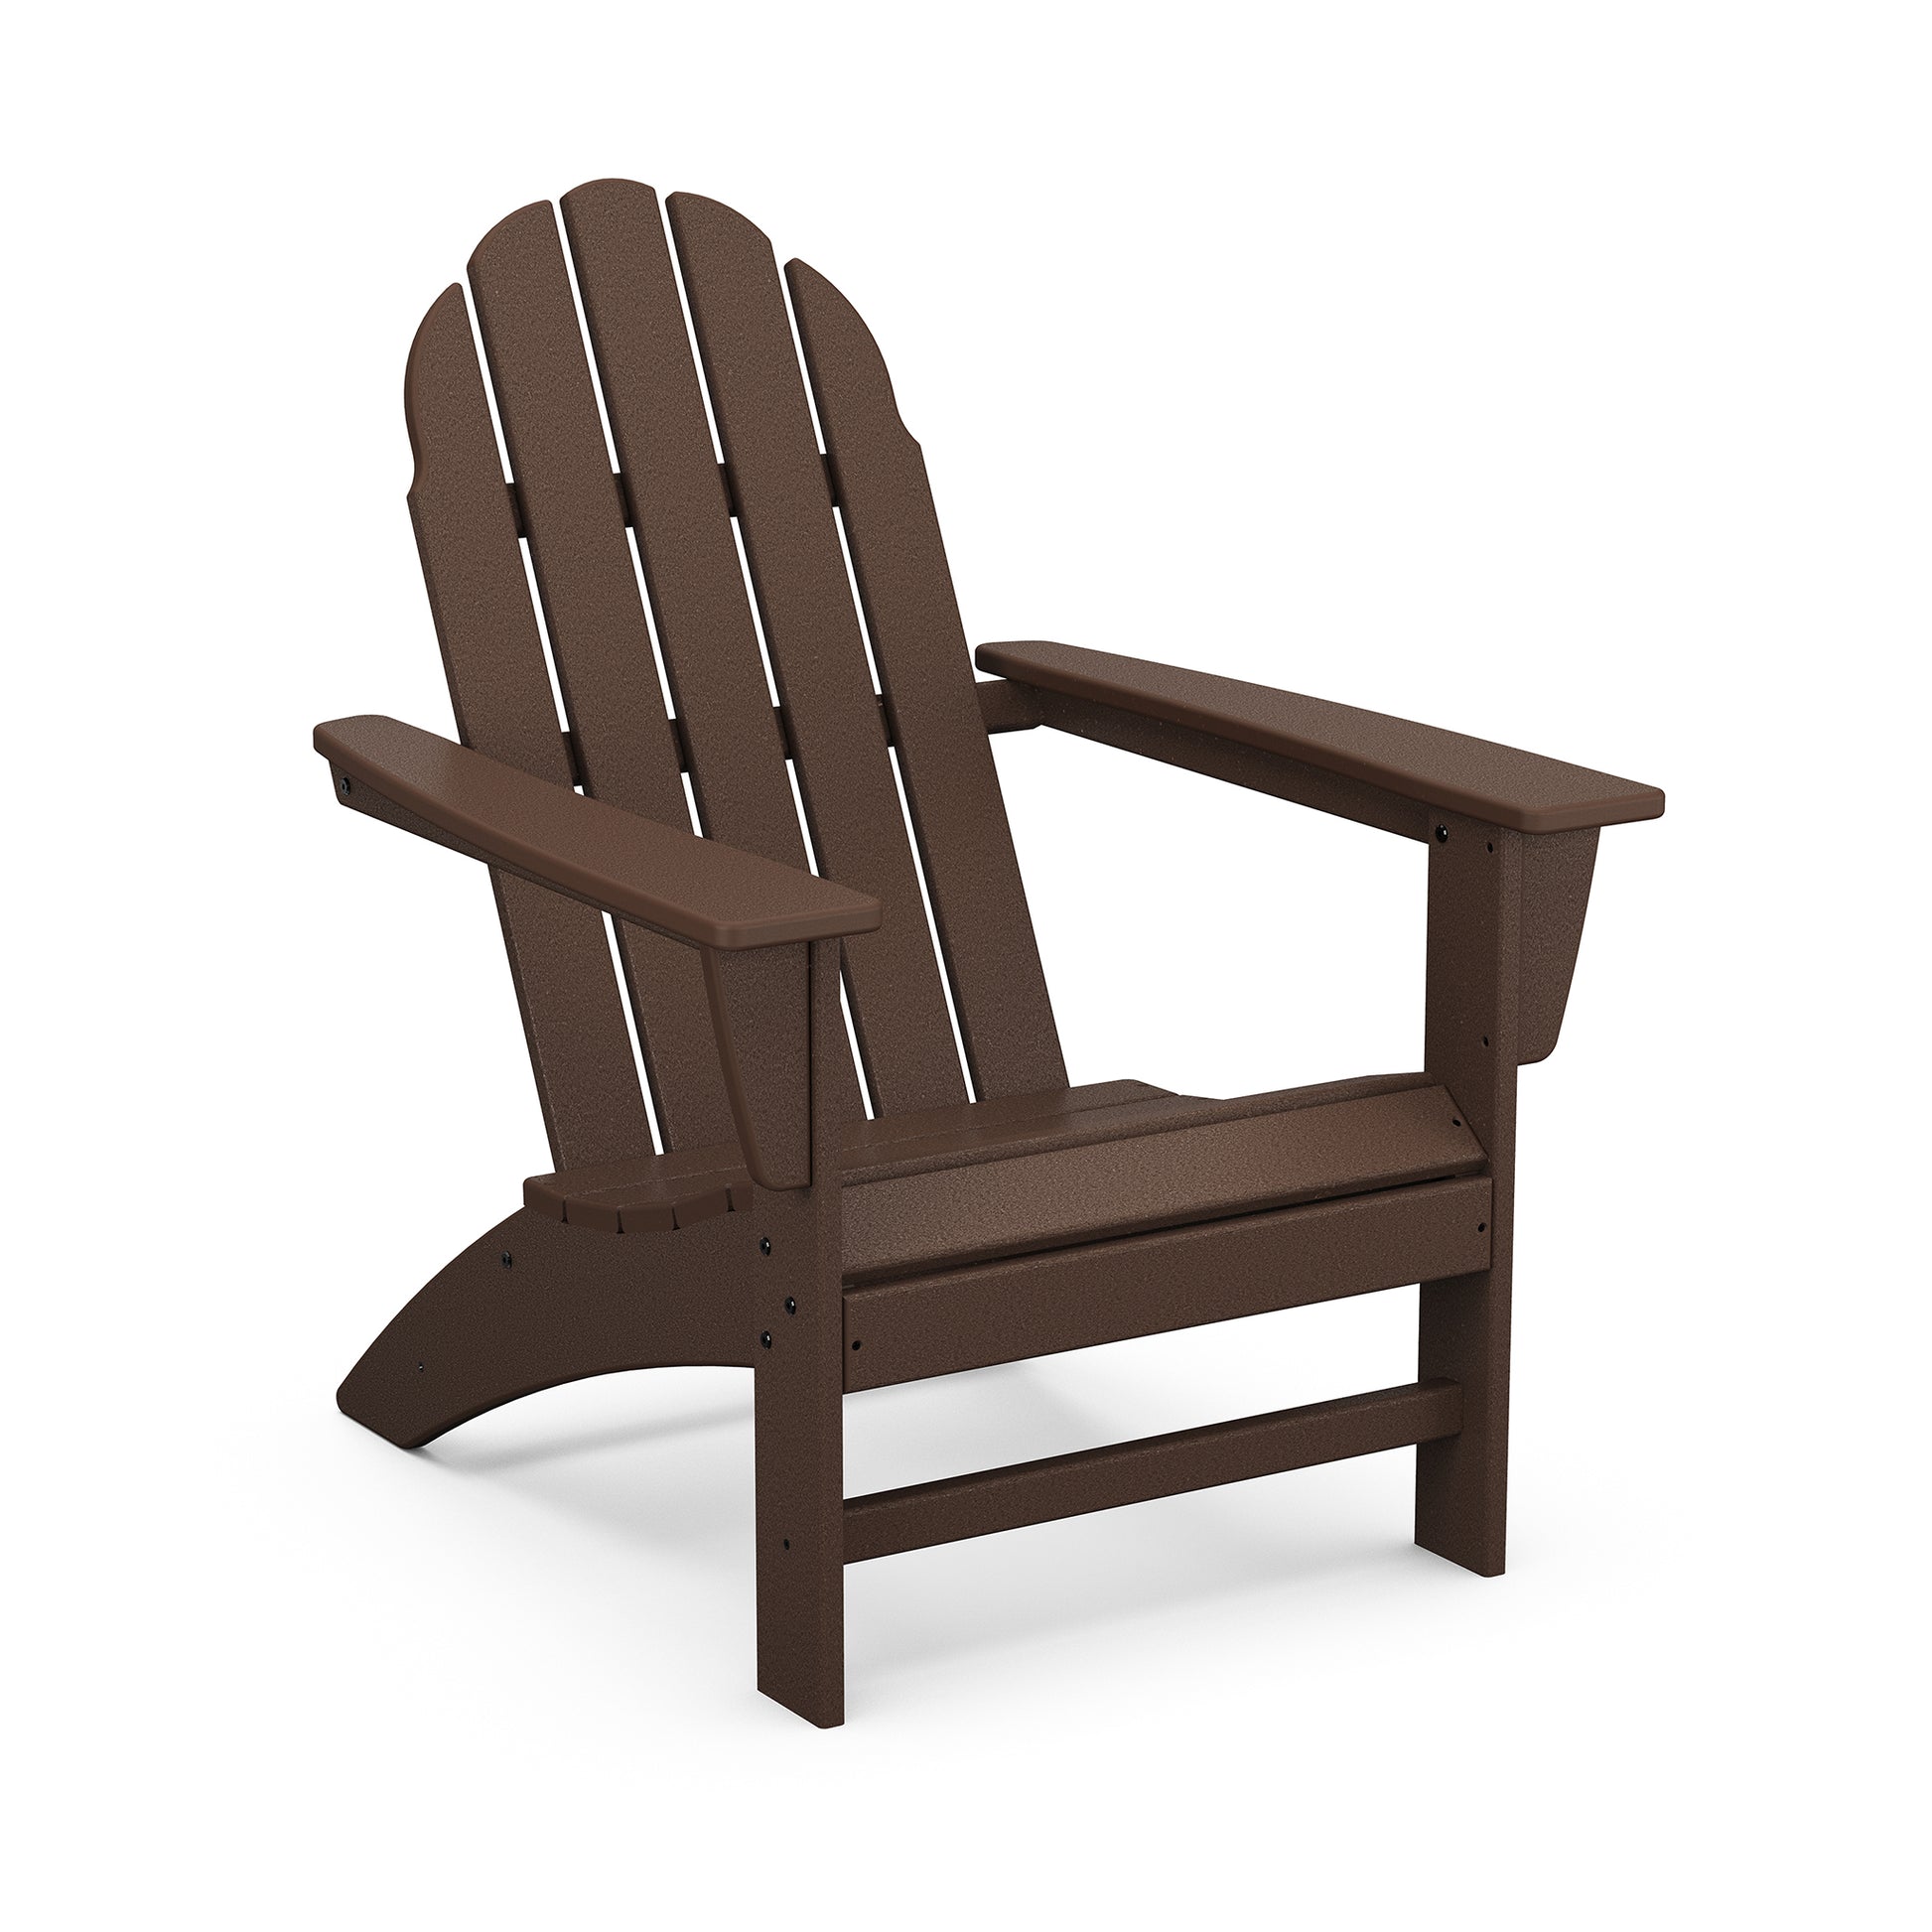 A brown POLYWOOD Vineyard Adirondack chair made of plastic, featuring a slatted back and seat, with wide armrests, isolated on a white background.